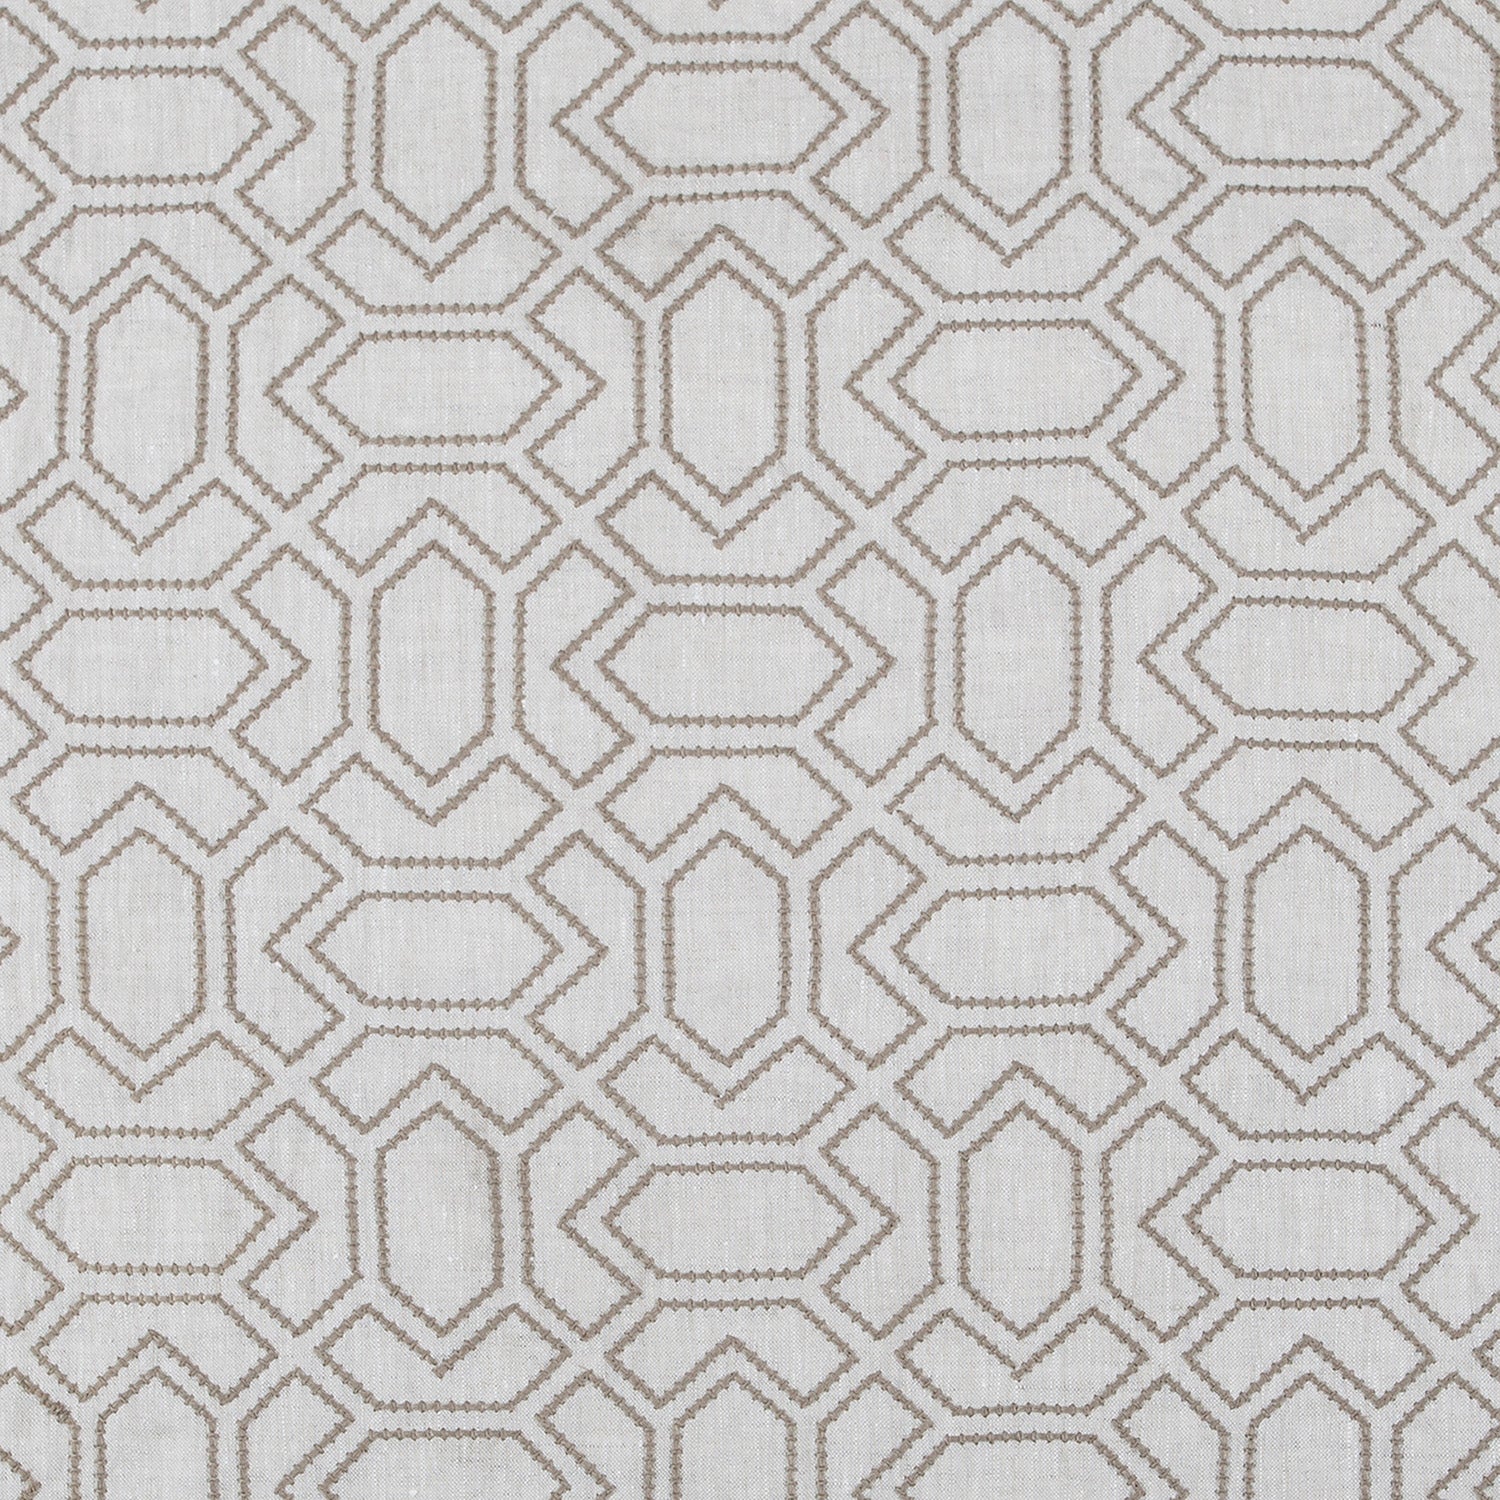 Fabric with an embroidered geometric grid print in brown on a light gray field.